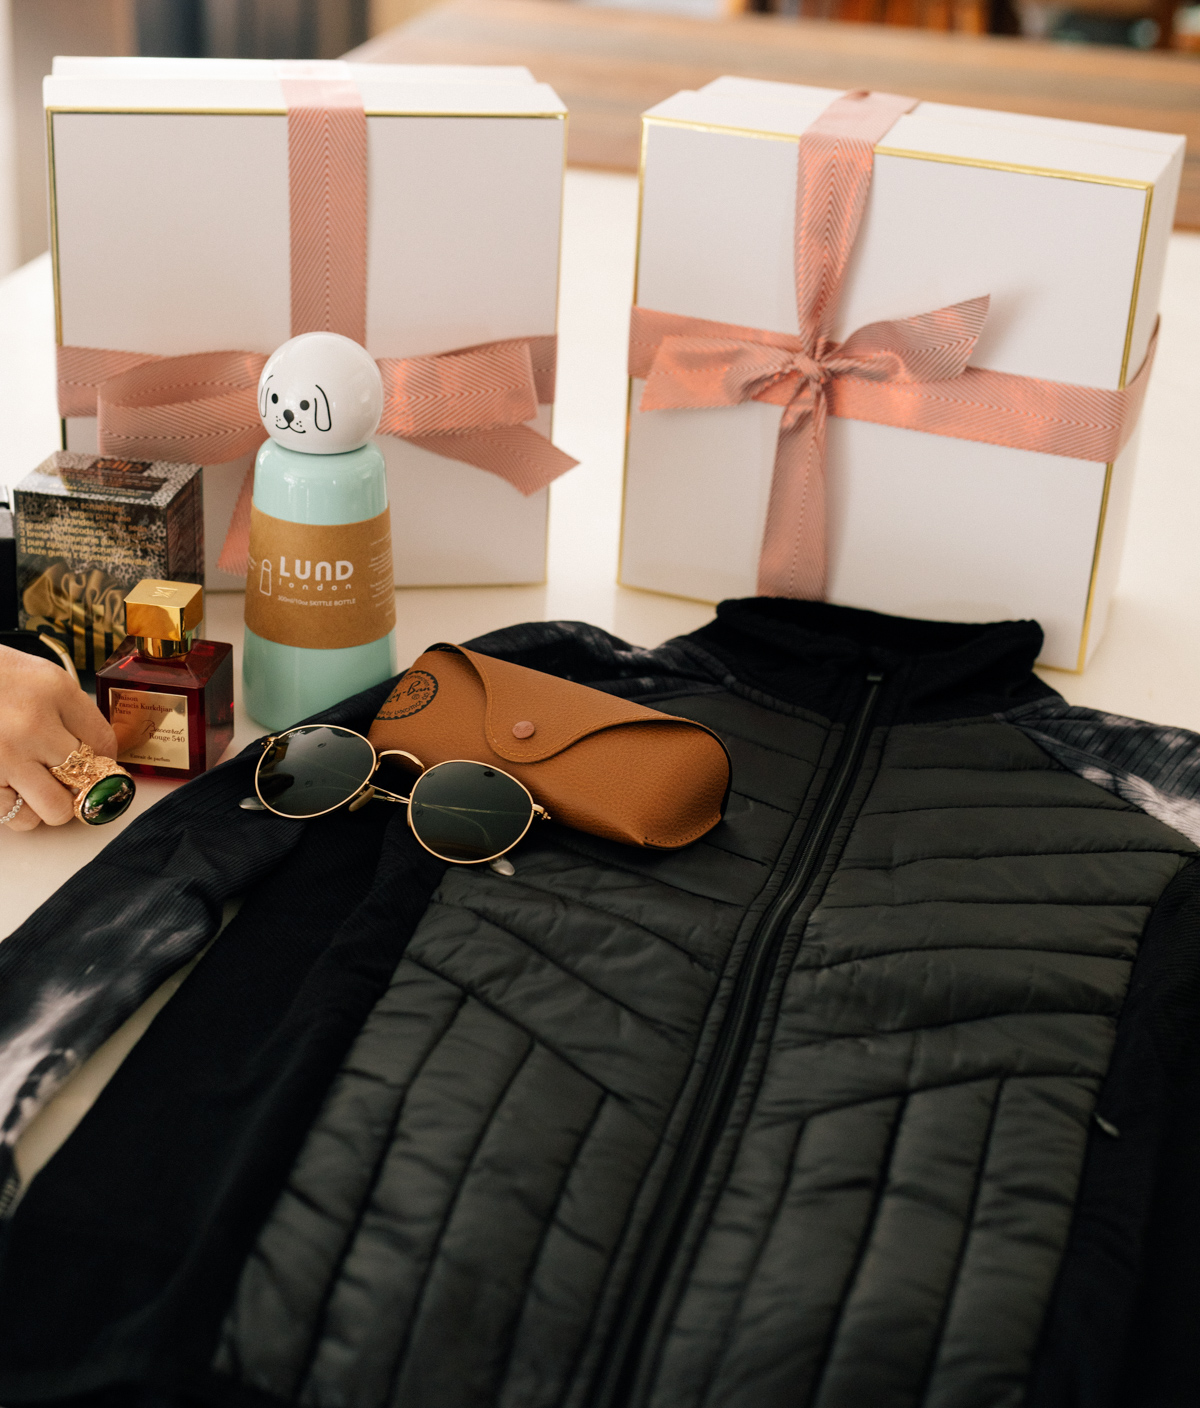 The Nordstrom Gift Guide